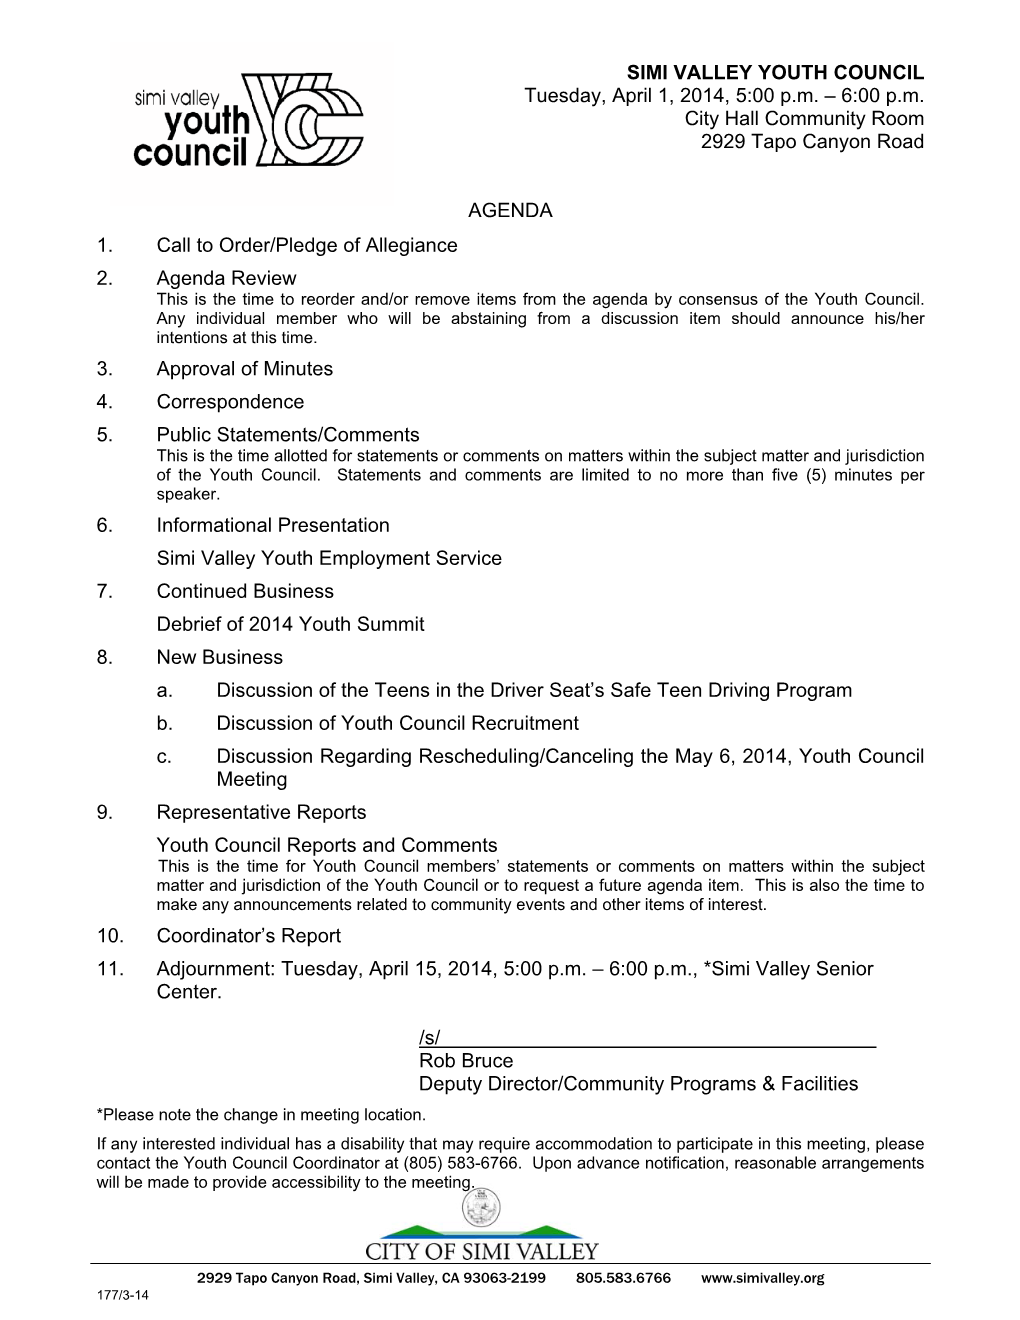 Youth Council Meeting Agenda Packet